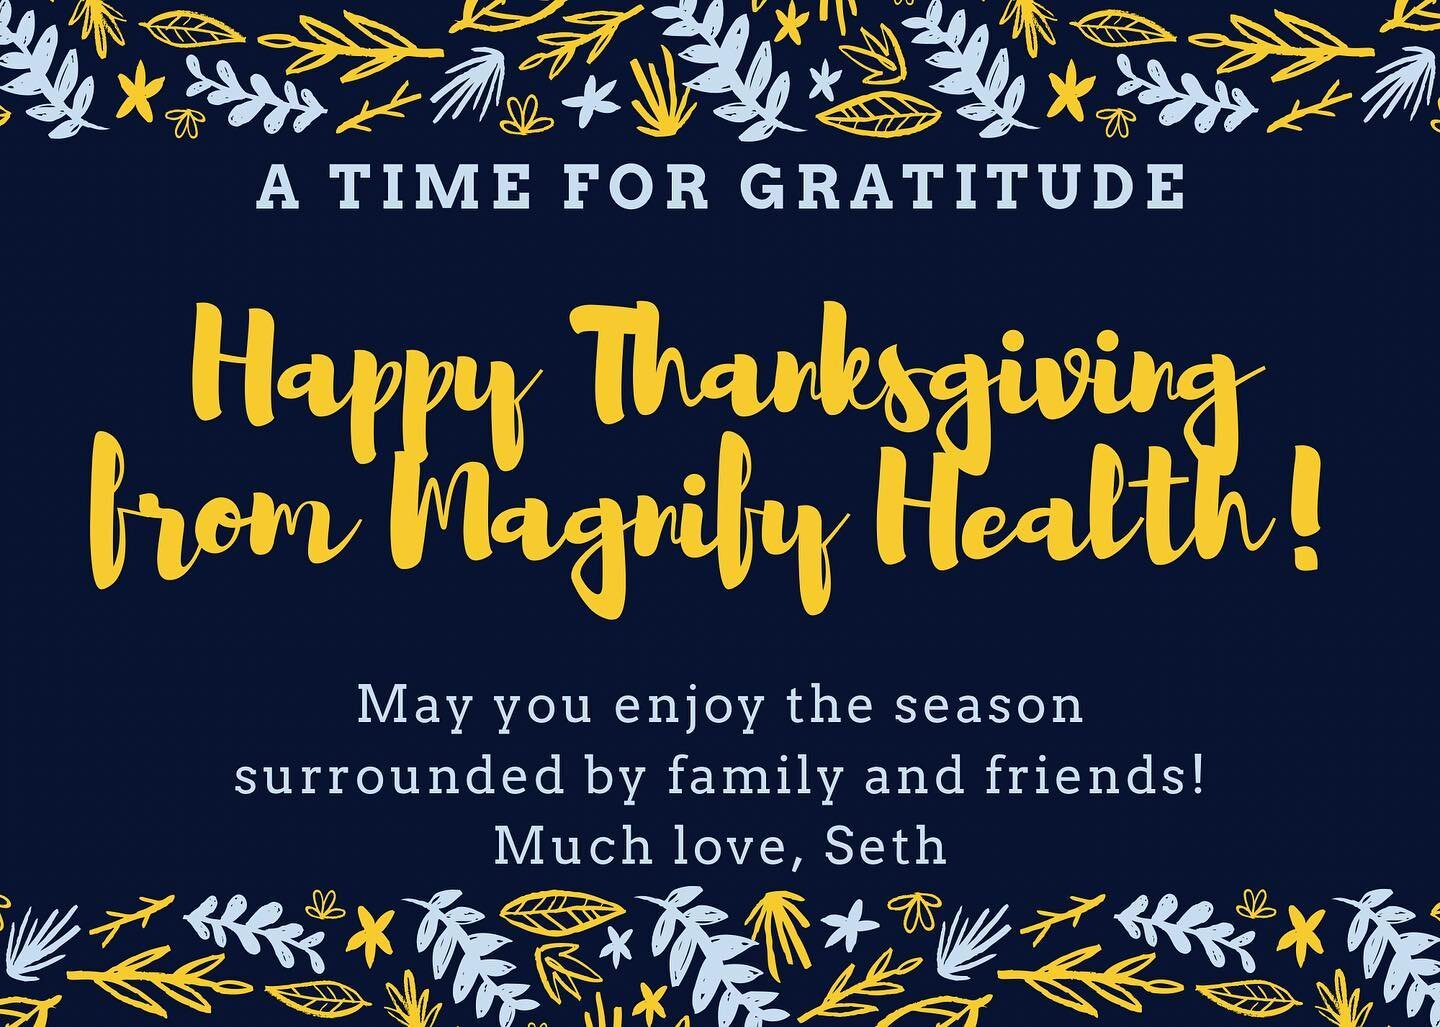 Happy Thanksgiving from Magnify Health! May your day be blessed and spent with those you love, reflecting on the things you&rsquo;re grateful for! 🙏🏼🦃🍽🍁❤️